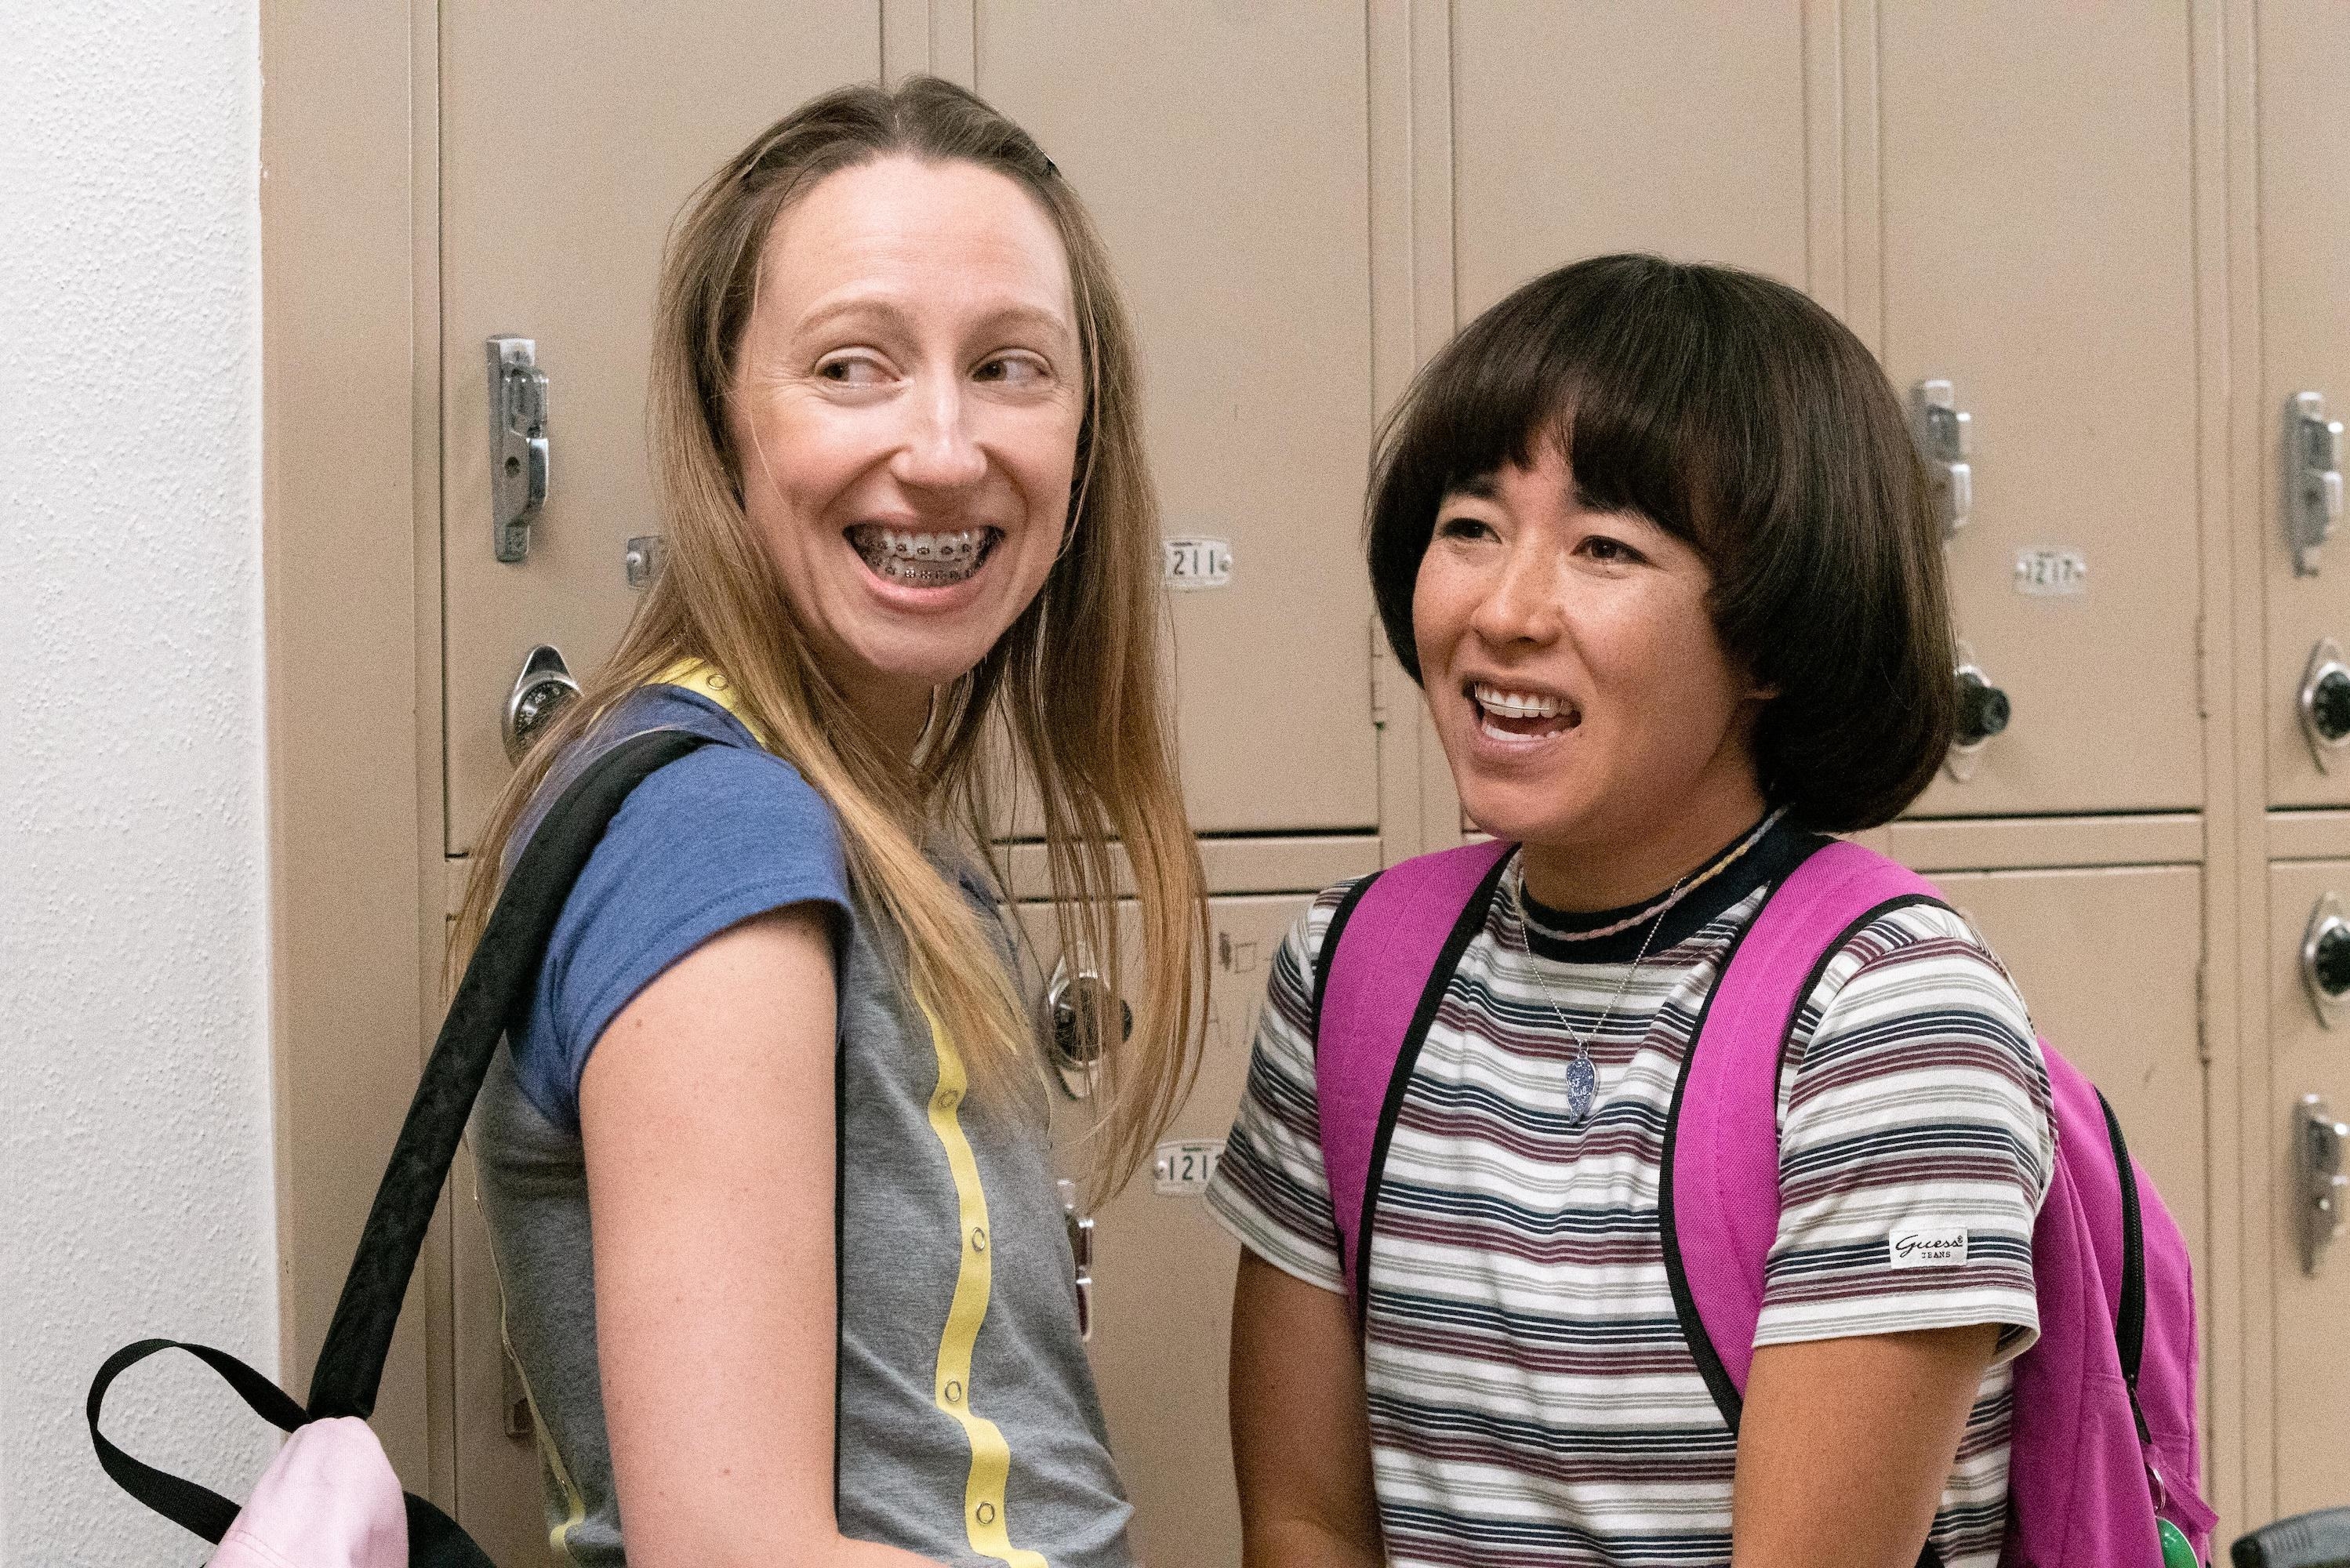 Anna and Maya show off their braces as they stand by locker with their backpacks